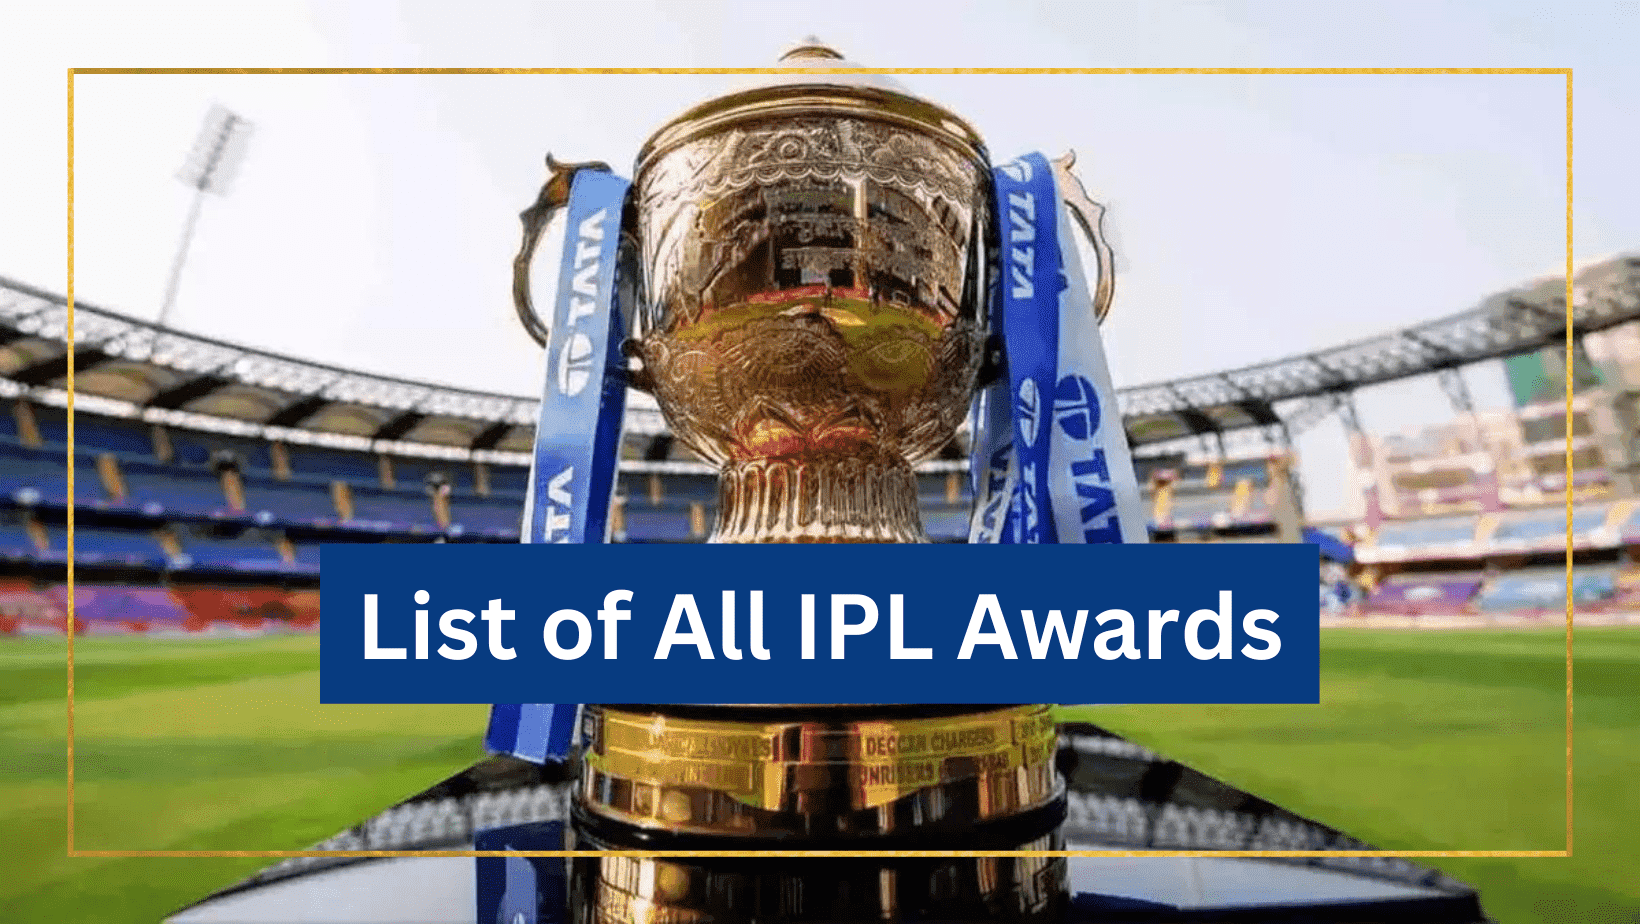 TATA IPL Award List With Names And Why Is It Given